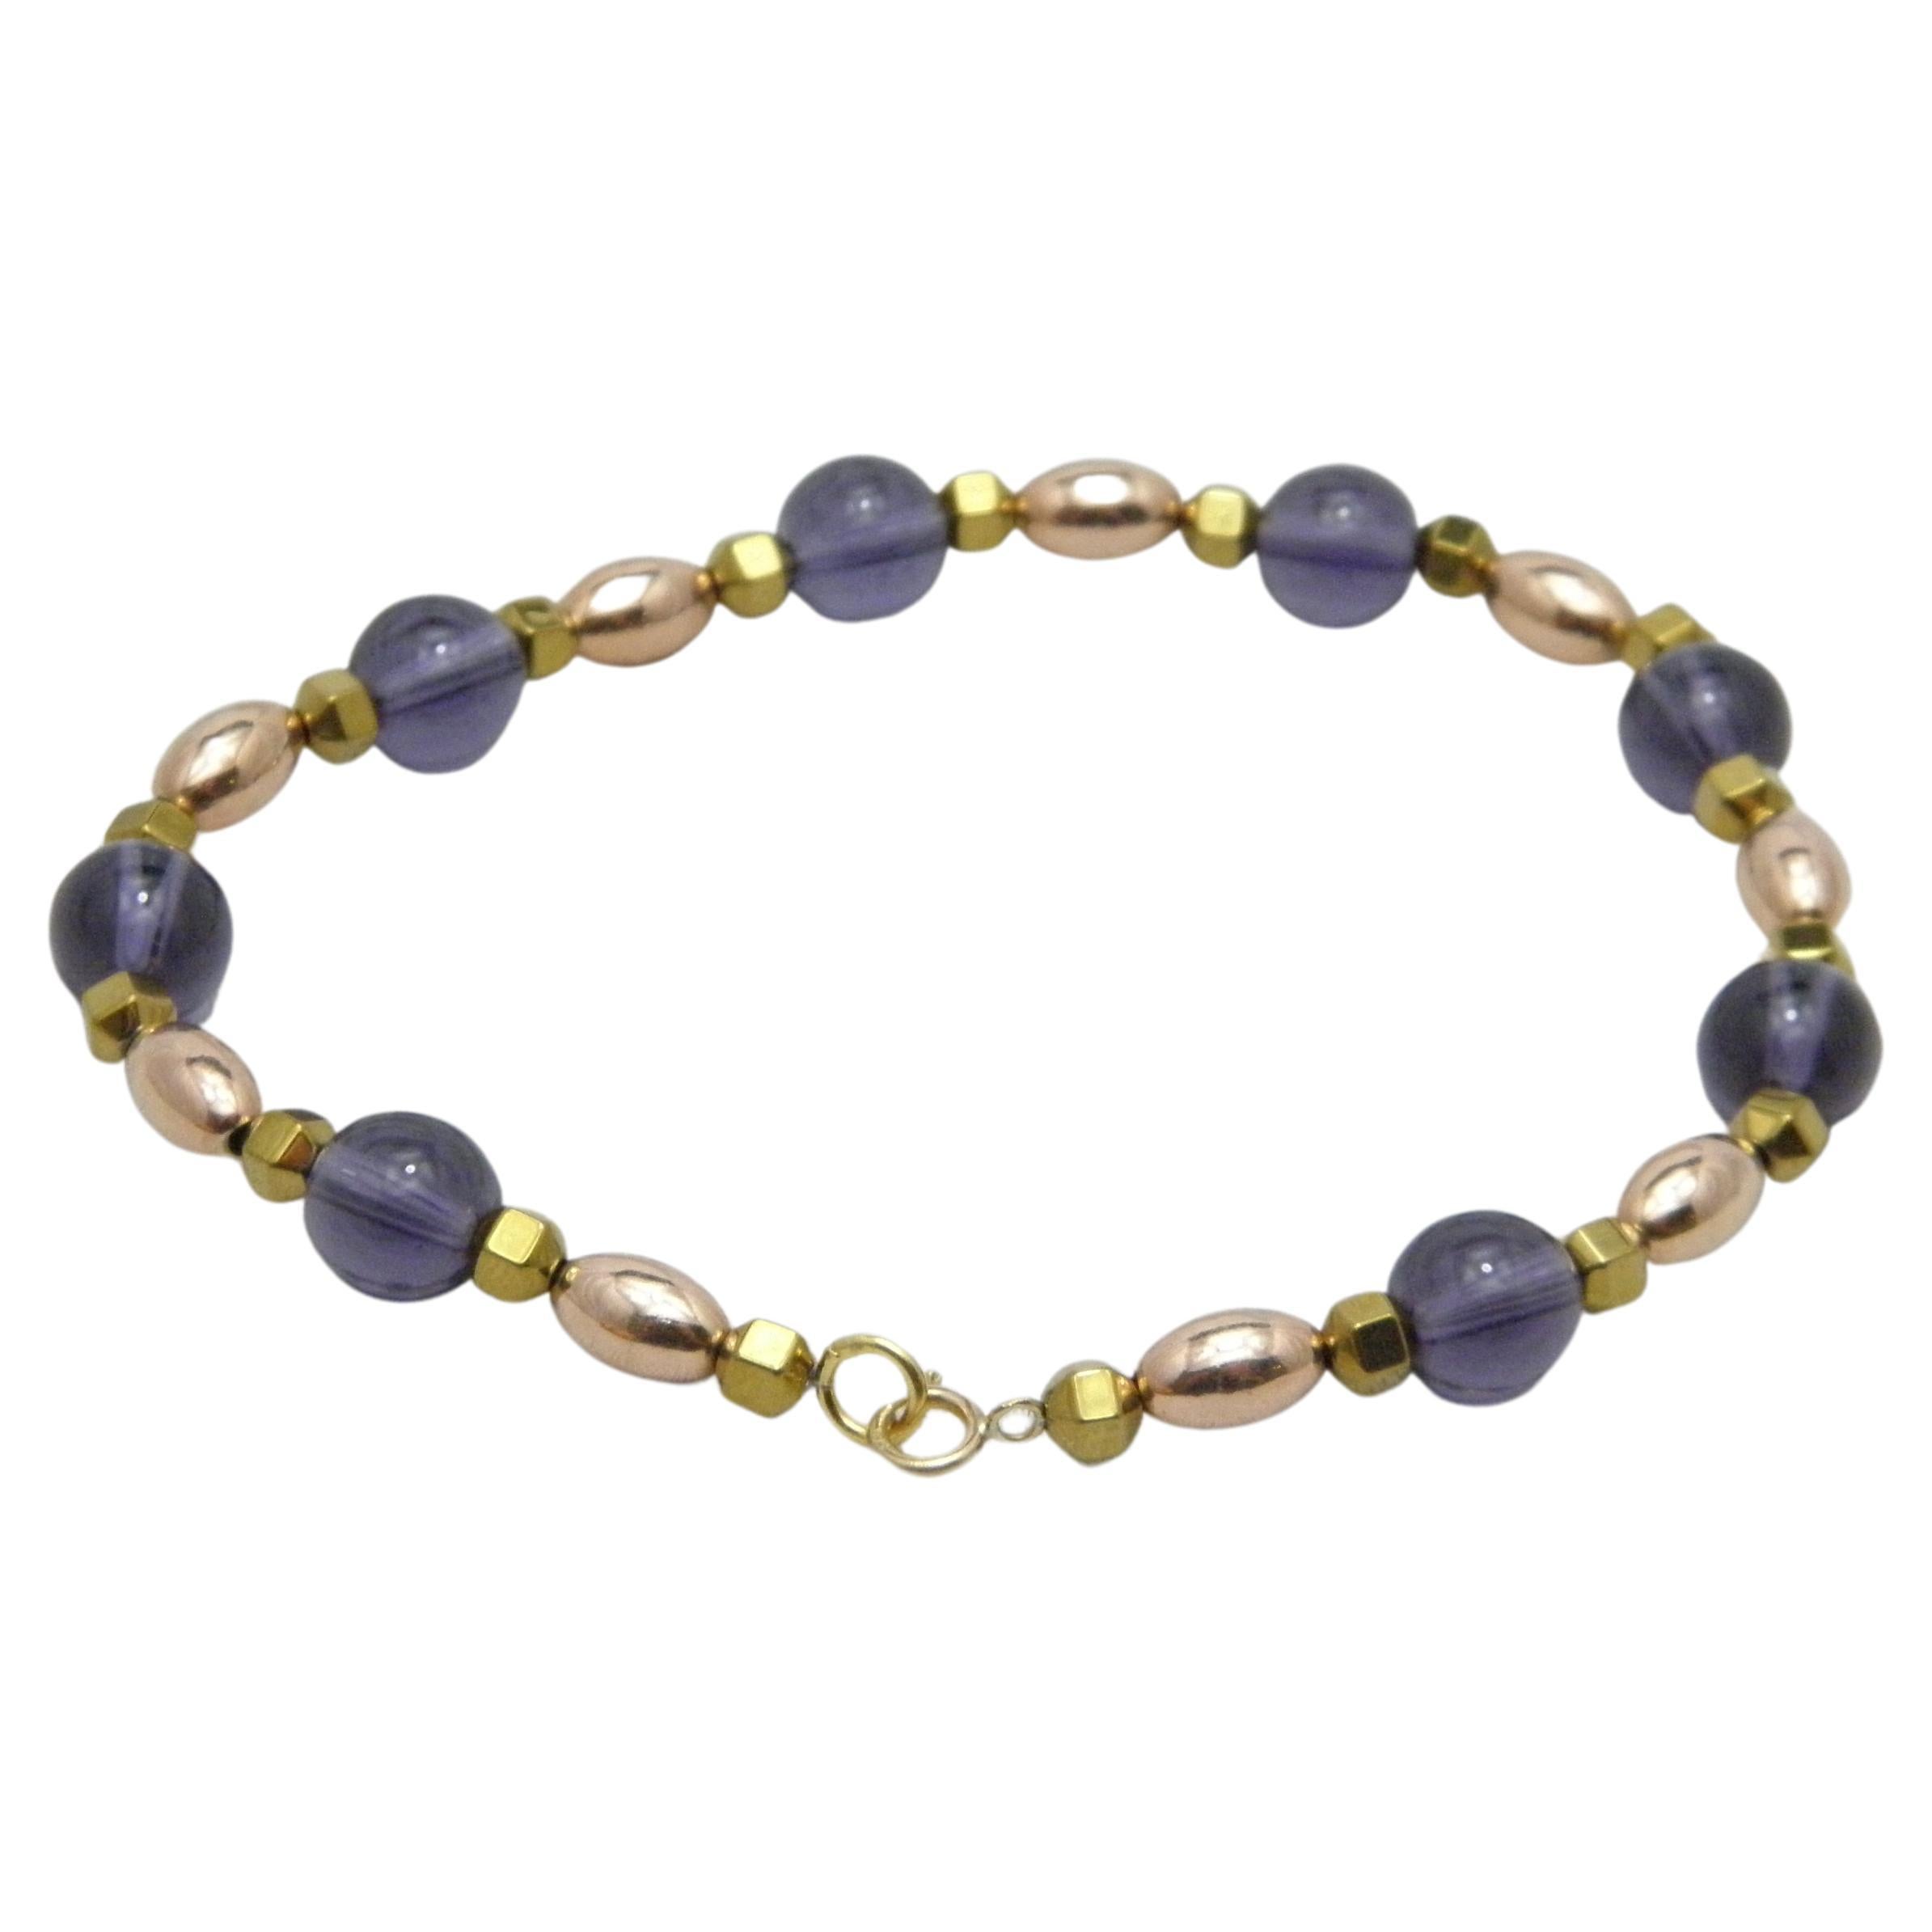 Vintage 9ct Gold Heavy Amethyst Bracelet 375 Purity Round Bead 9.9g For Sale